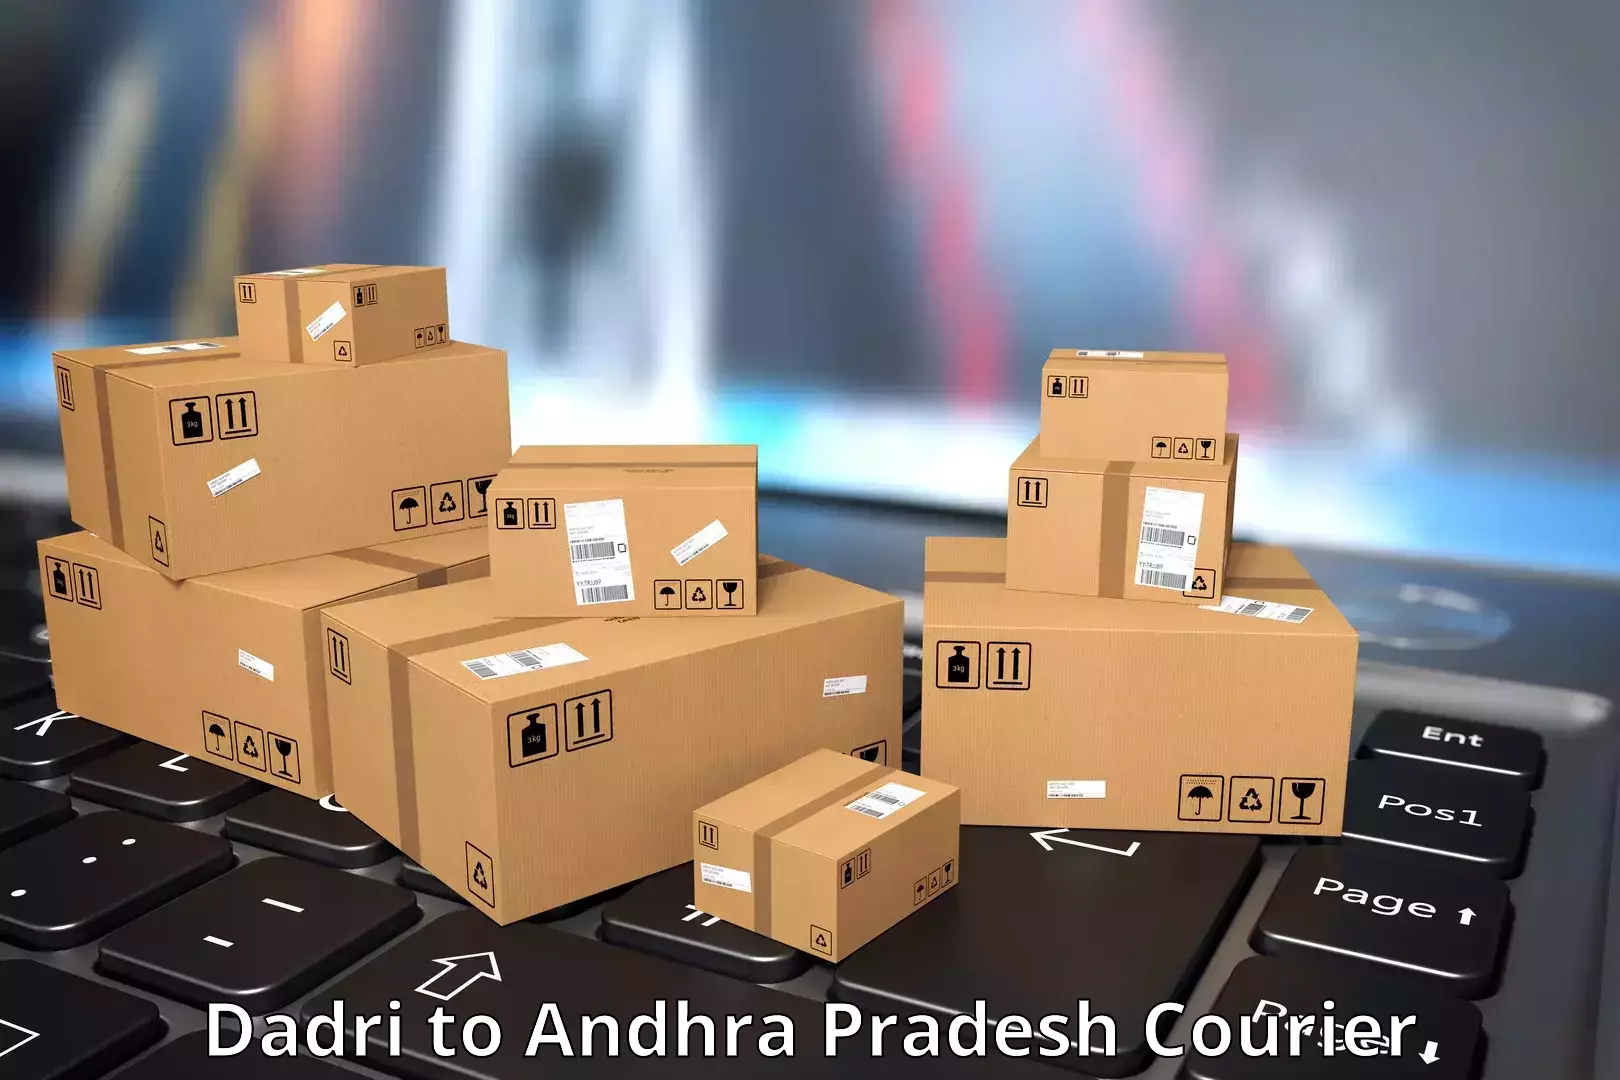 Subscription-based courier Dadri to Andhra Pradesh